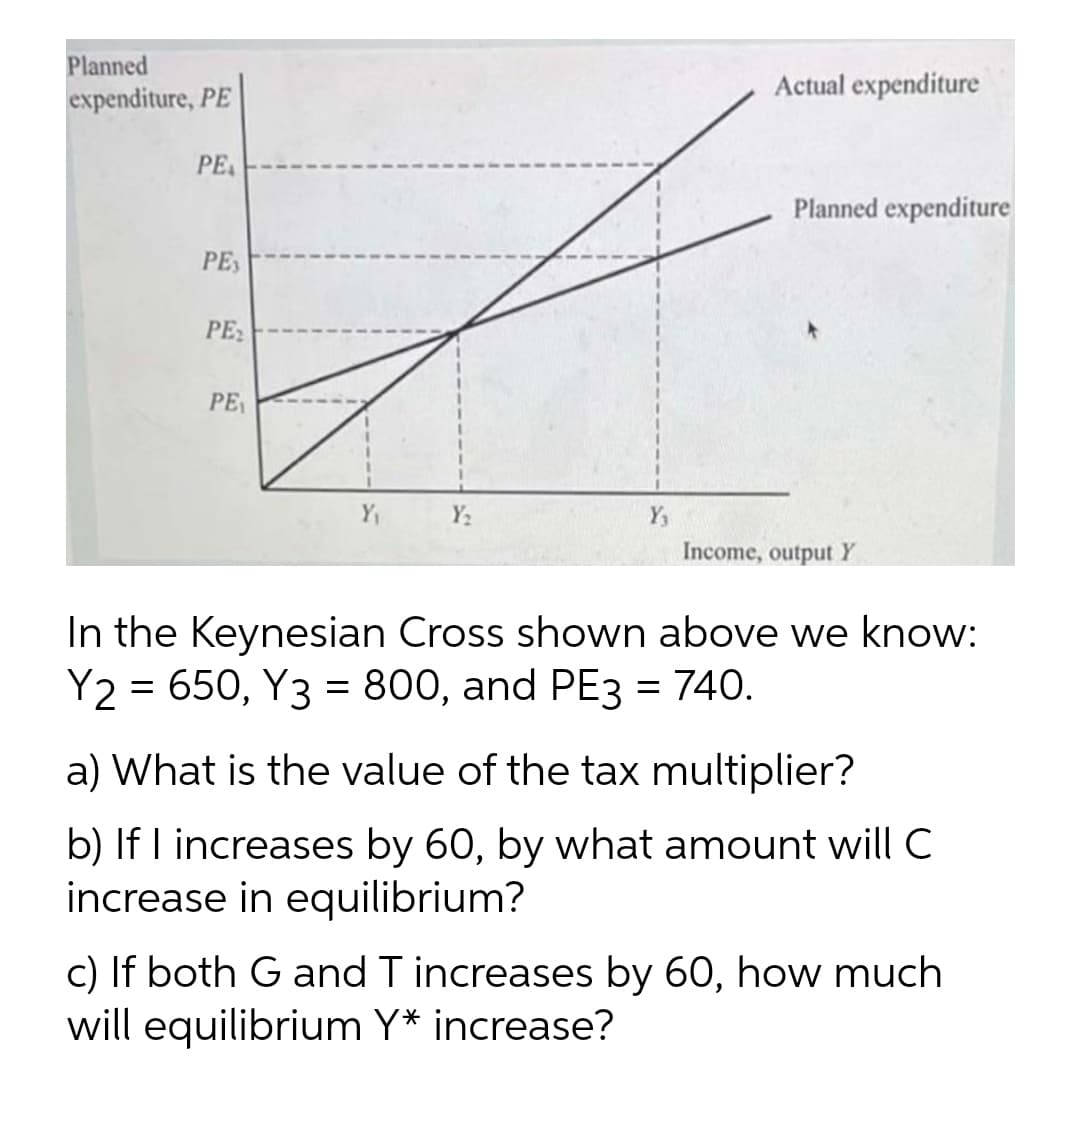 Planned
Actual expenditure
expenditure, PE
PE
Planned expenditure
PE
PE
PE
Y,
Y2
Y3
Income, output Y
In the Keynesian Cross shown above we know:
Y2 = 650, Y3 = 800, and PE3 = 740.
a) What is the value of the tax multiplier?
b) If I increases by 60, by what amount will C
increase in equilibrium?
c) If both G and T increases by 60, how much
will equilibrium Y* increase?
